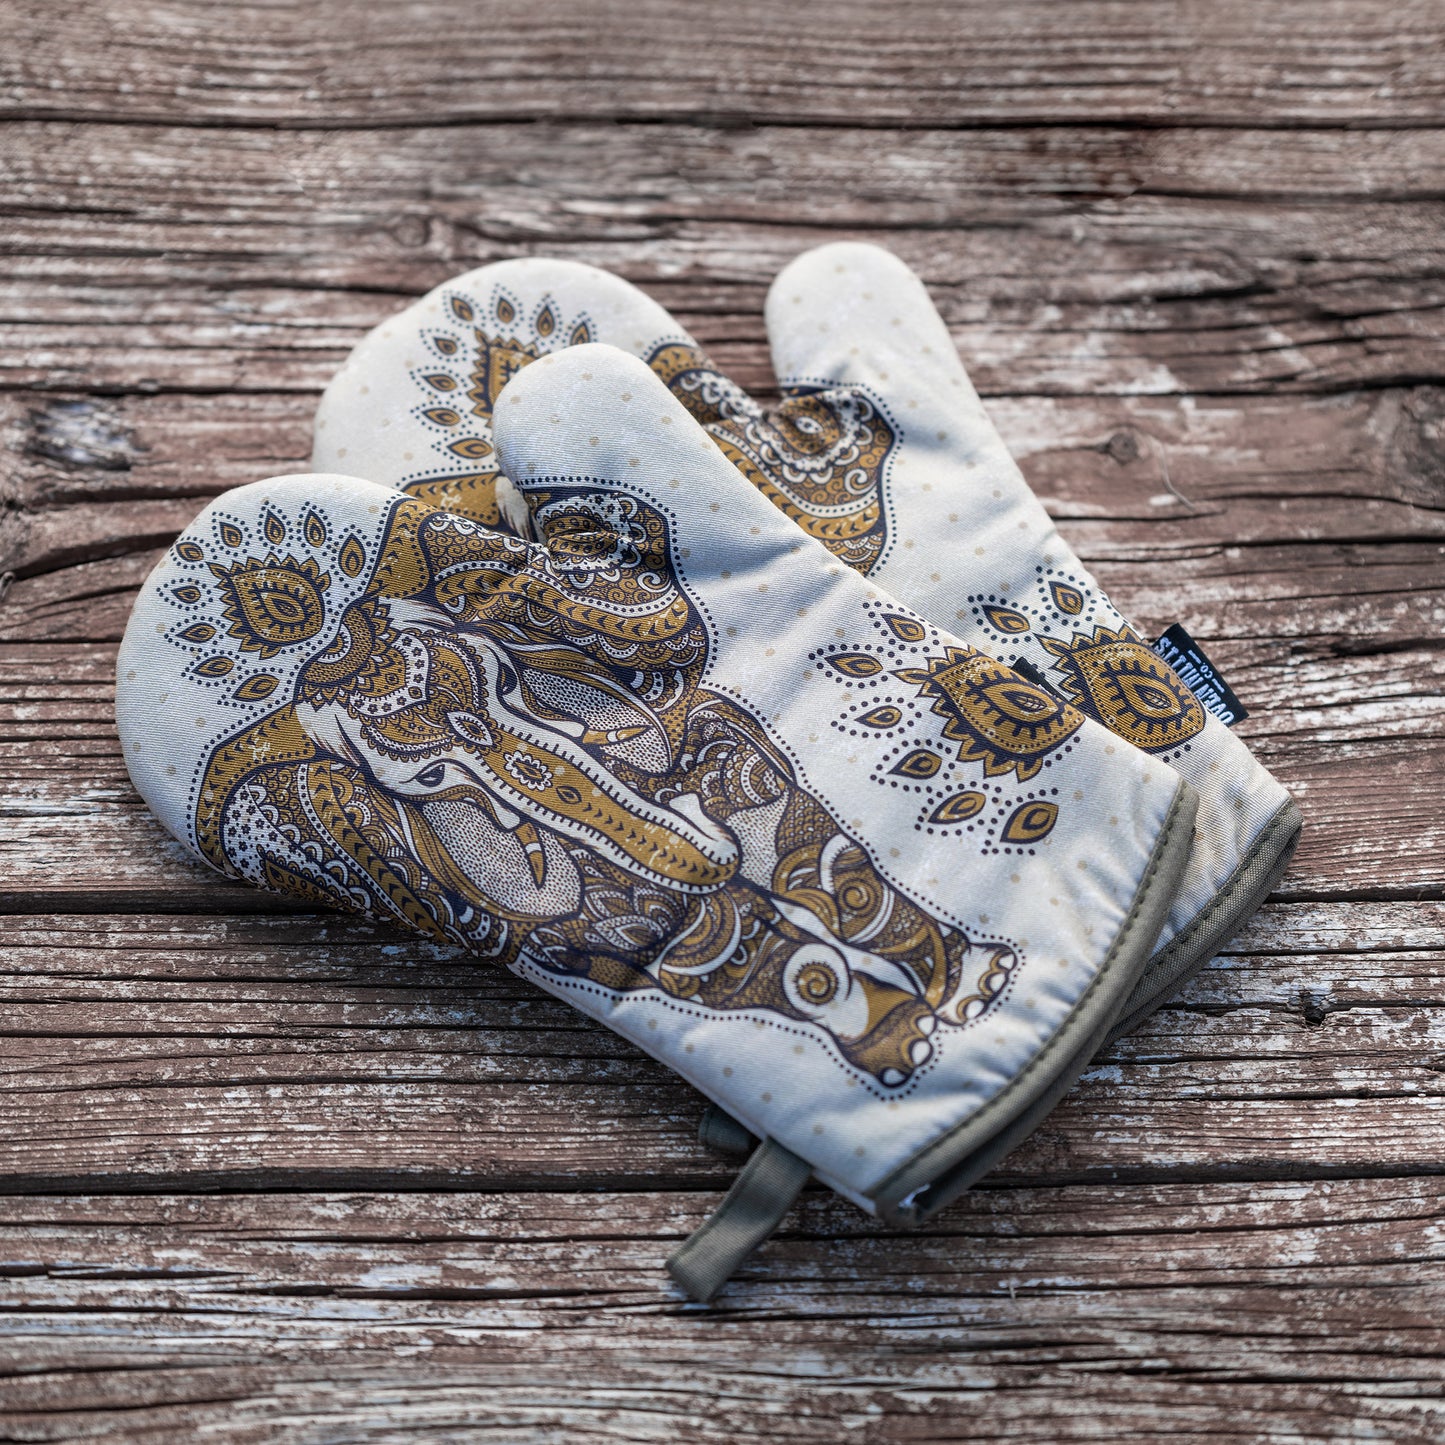 Boho Elephant Oven Mitts gloves premium quality best oven mitts